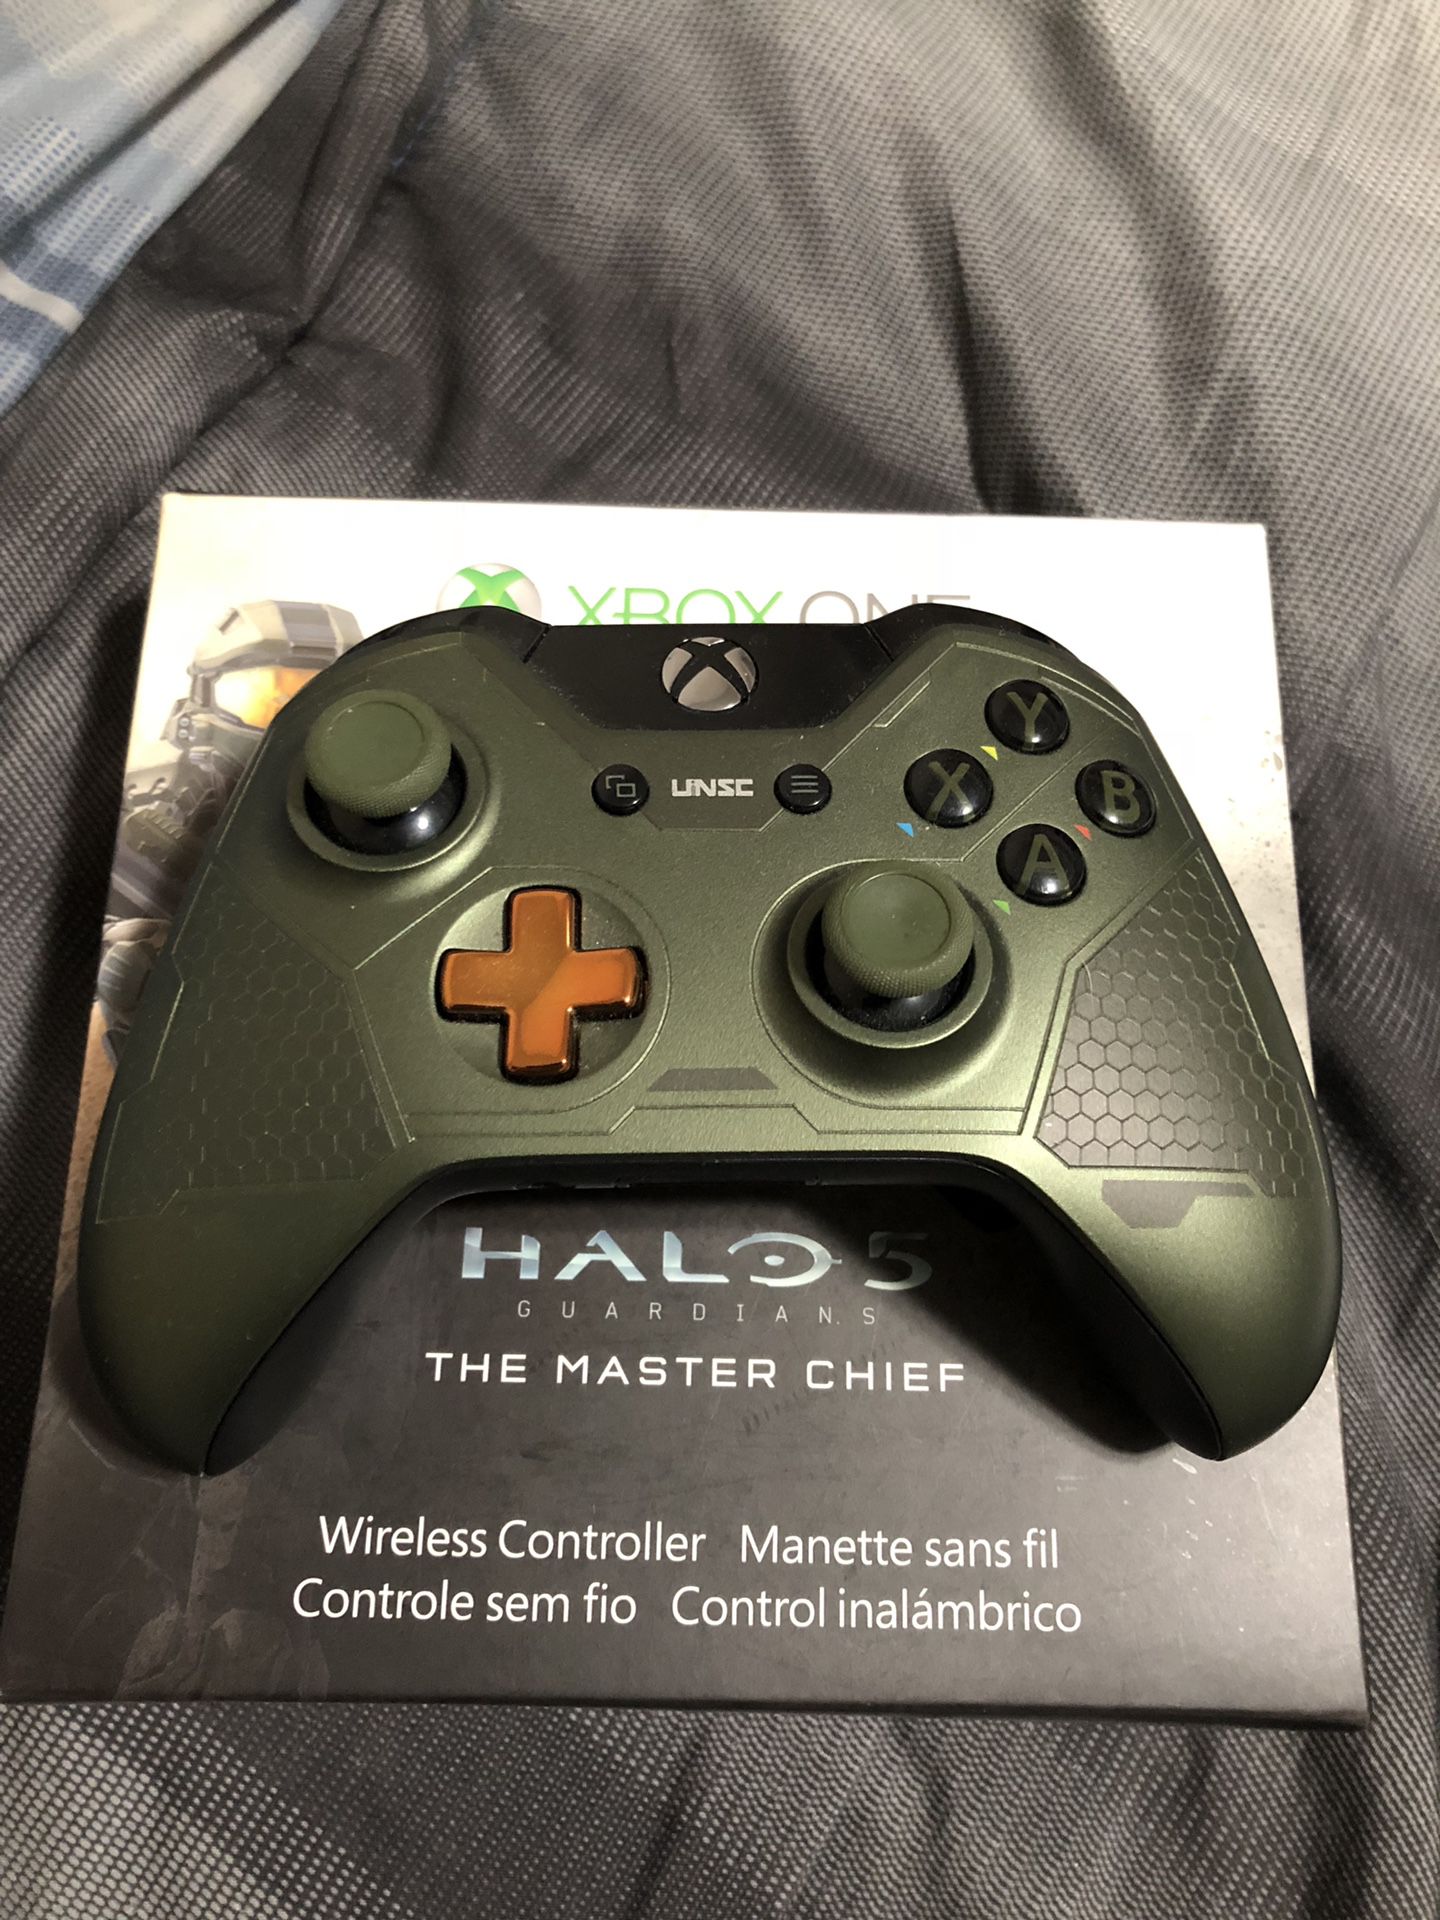 Halo 5 limited edition controller with the Master Chief Collection